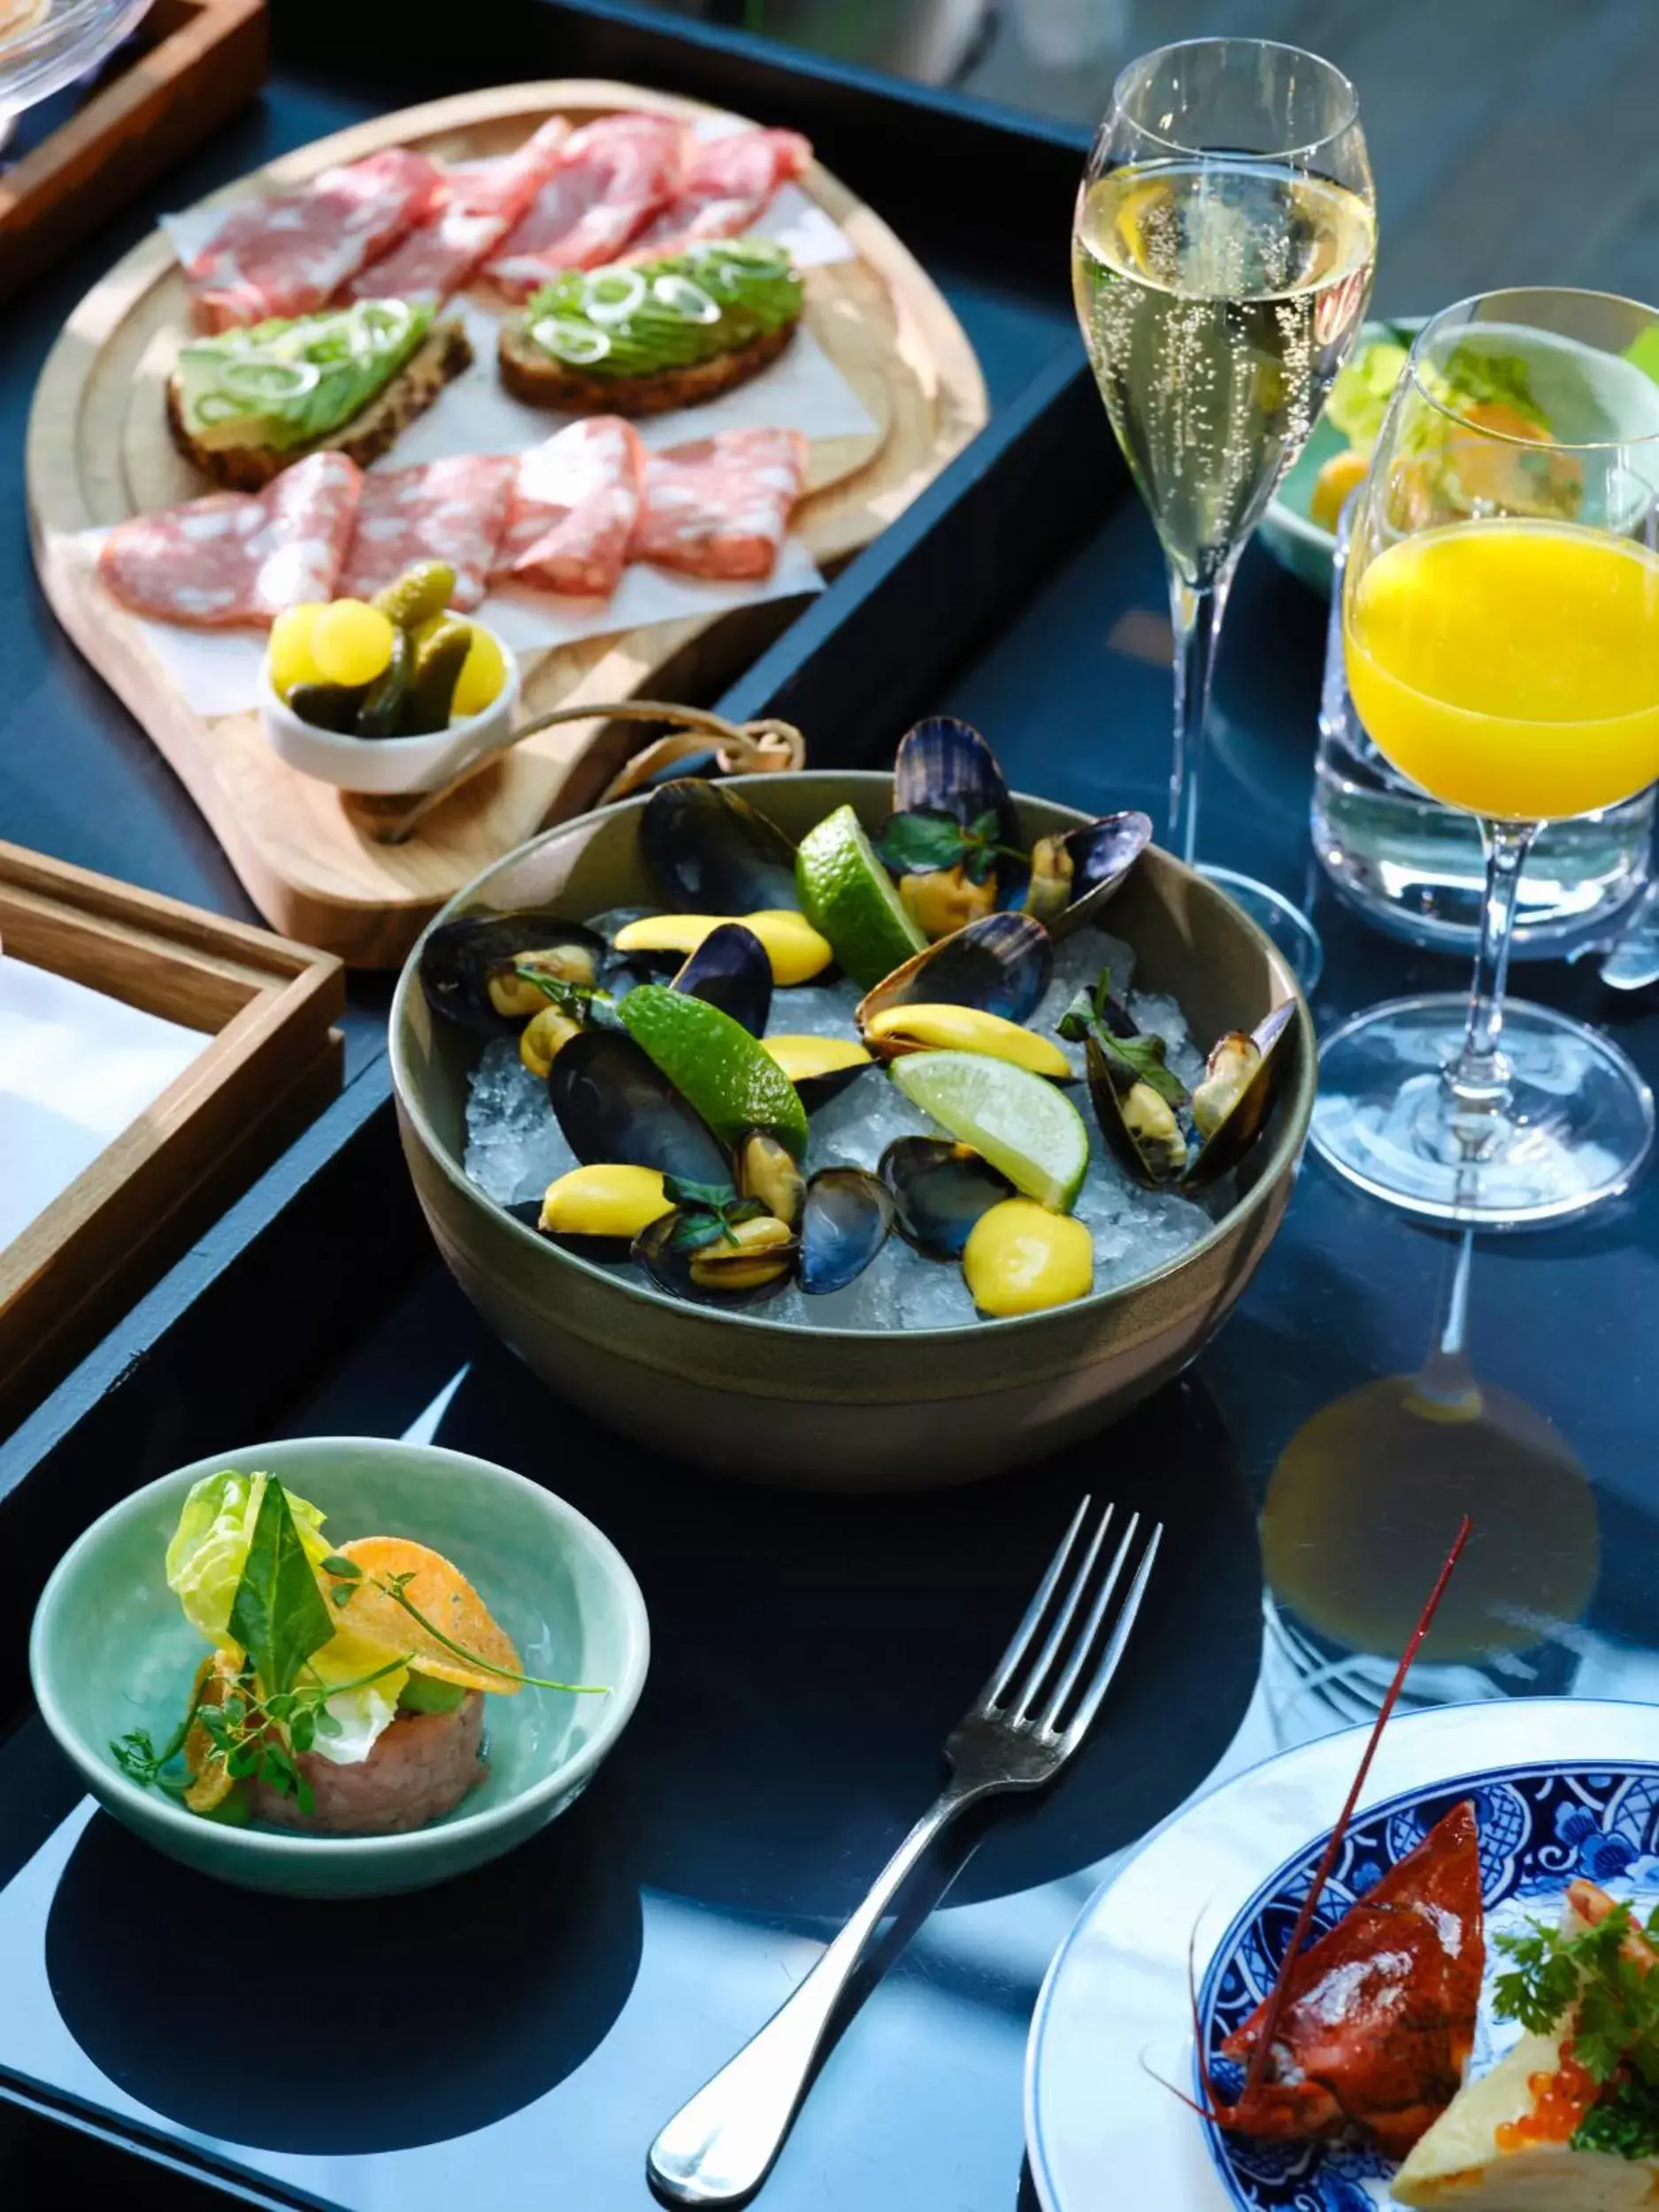 Food close-up, Lunch and Dinner in Conservatorium Hotel